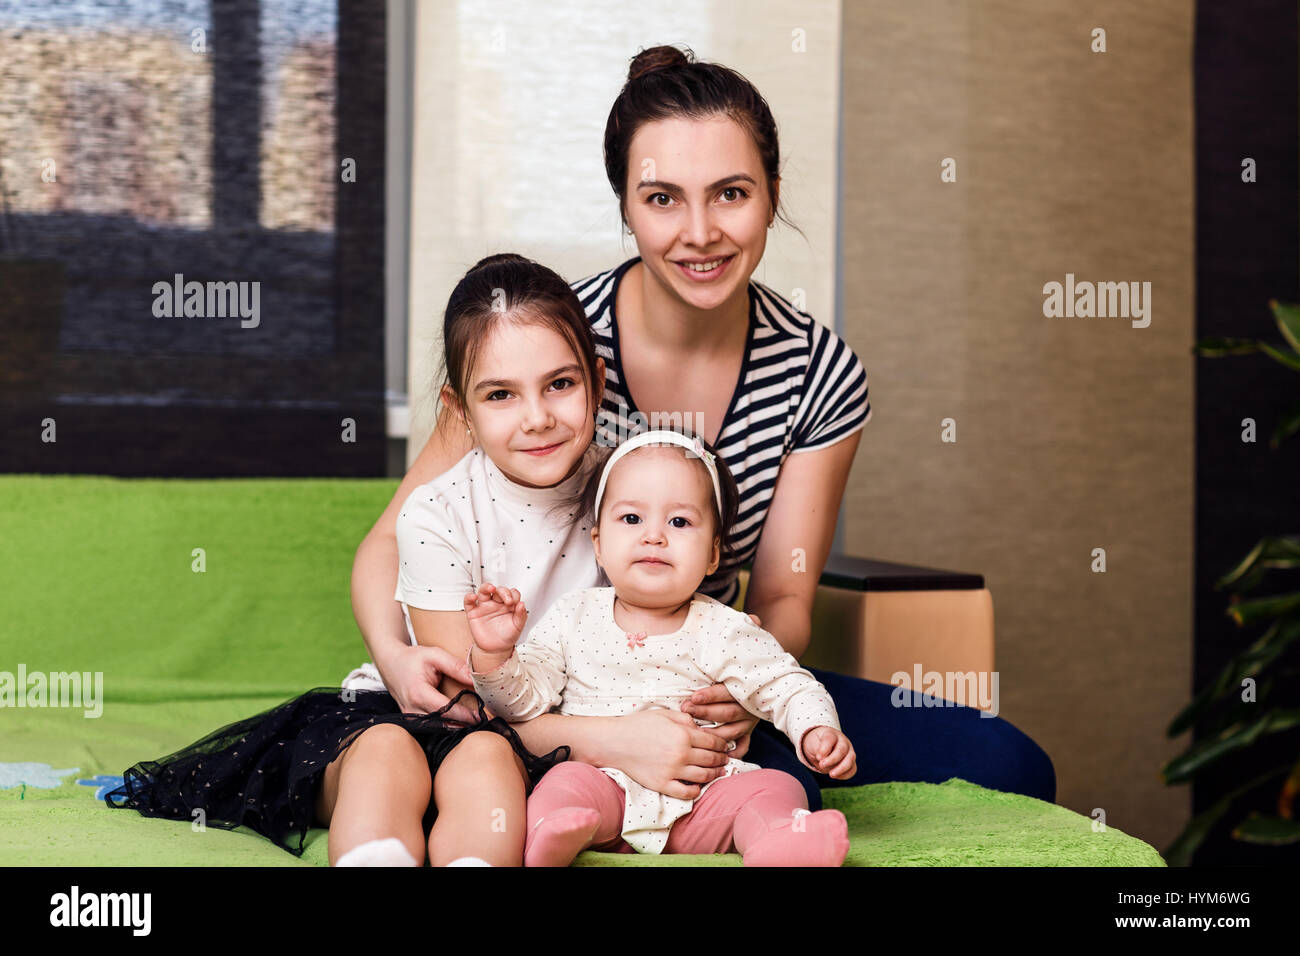 Mother and her daughters hugging and posing. Stock Photo